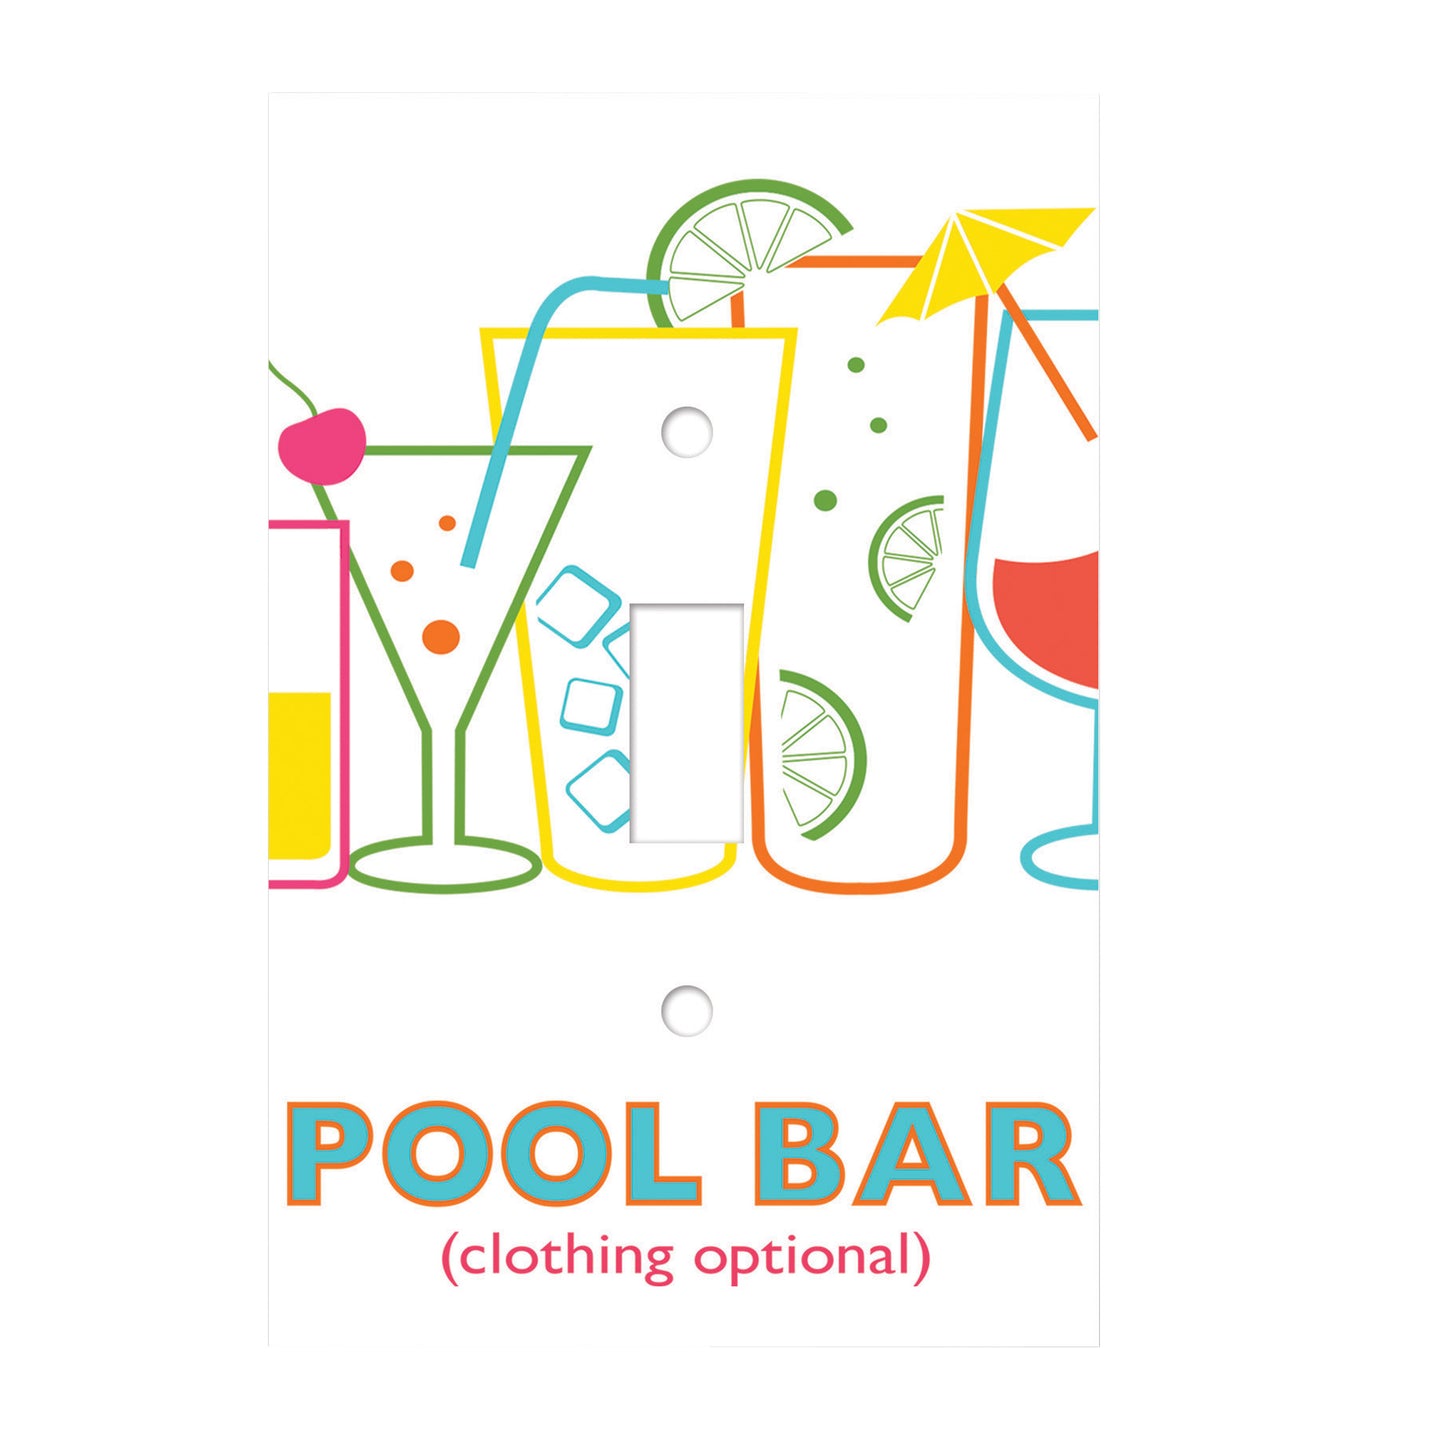 ceramic single toggle switch plate featuring print of various colorful drinking vessels with embellishments and text that reads "pool bar, clothing optional".